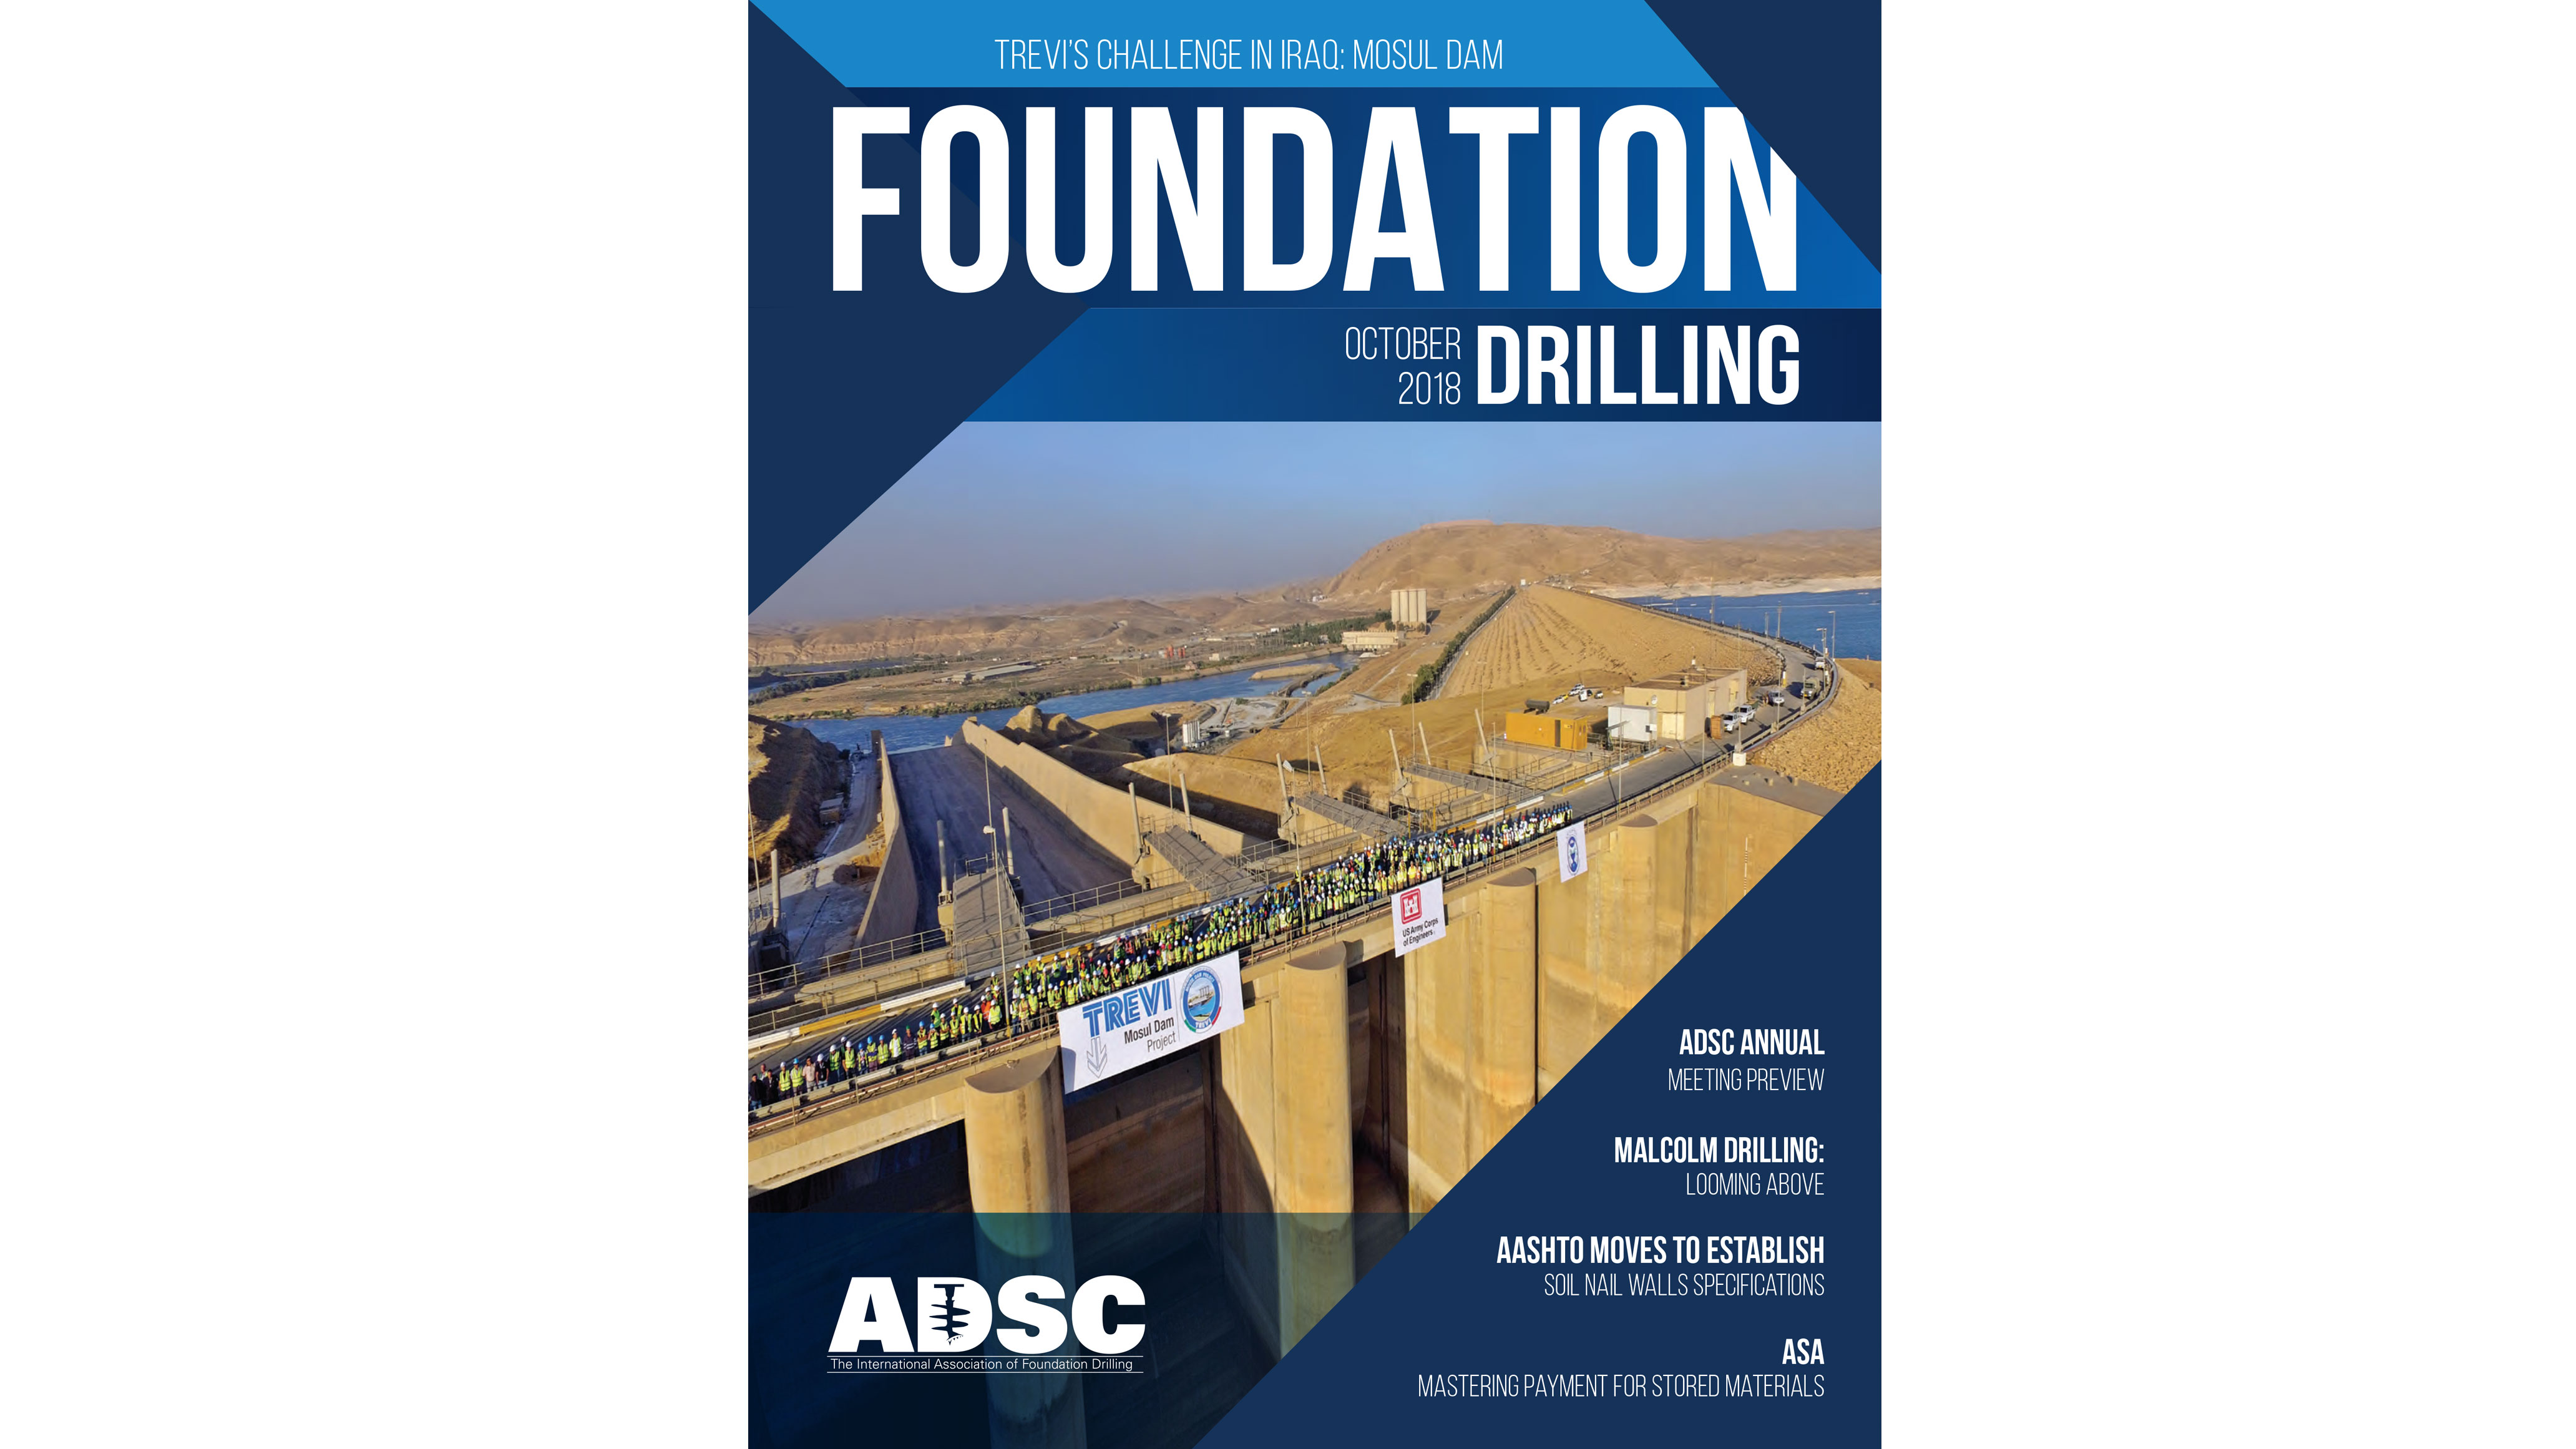 The Mosul jobsite on the cover of ADSC Foundation Drilling | Trevi 1